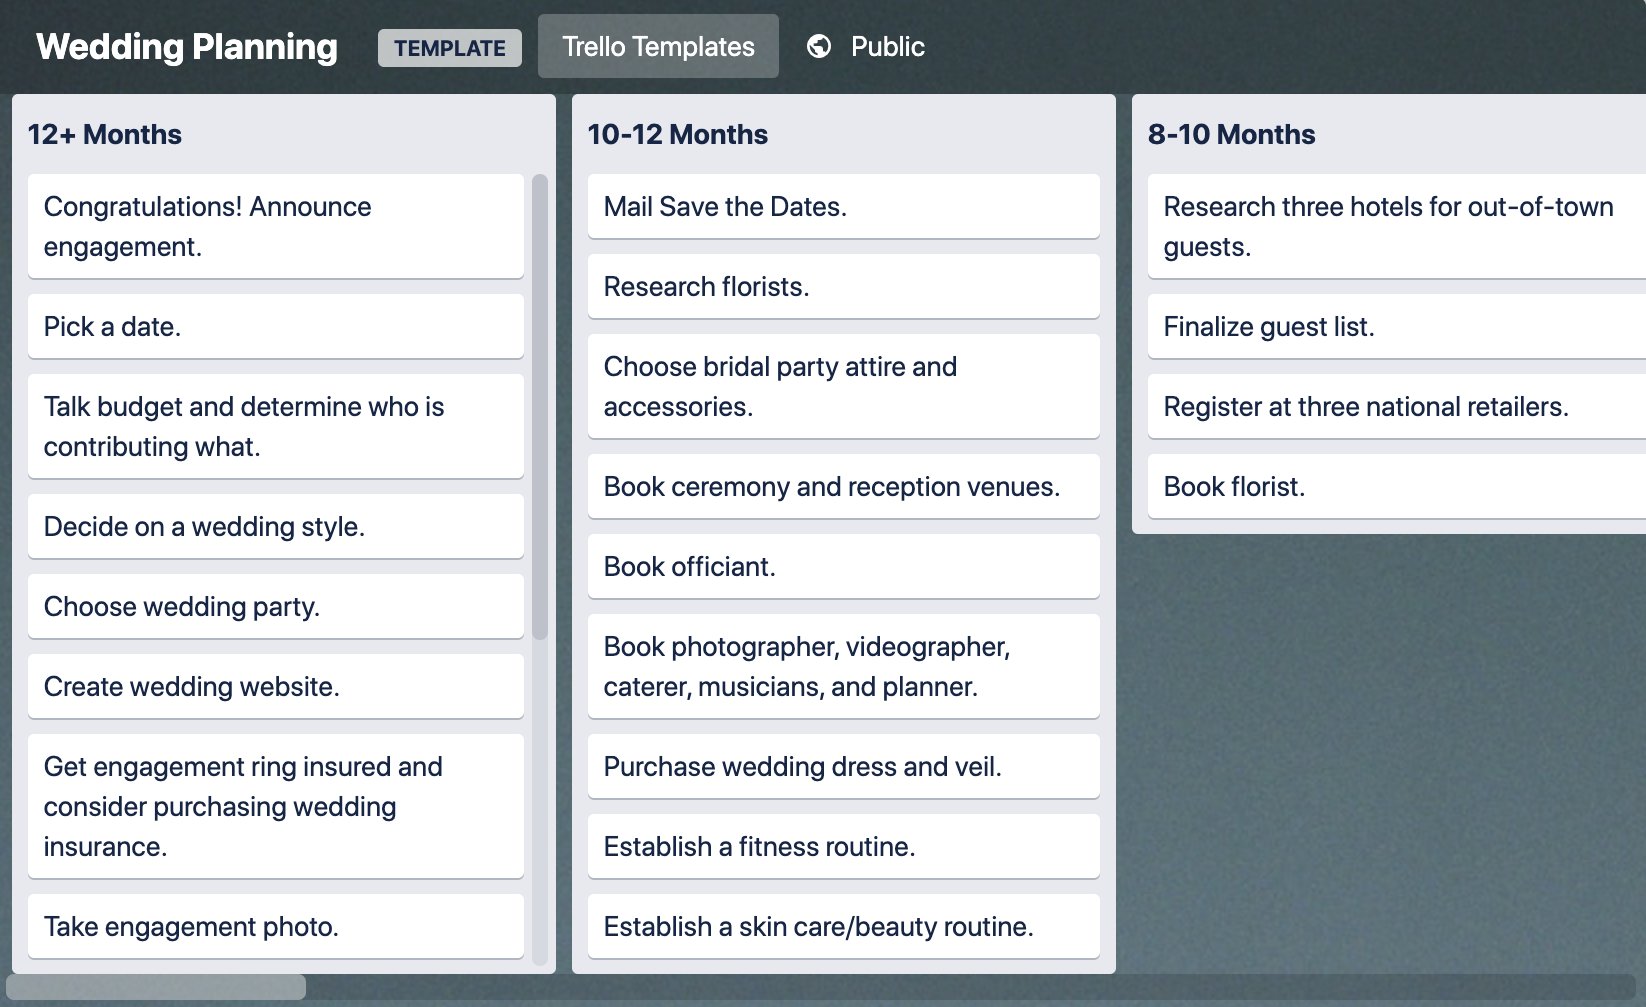 wedding-planning-Trello-board-that-includes-cards-organized-by-time-until-the-wedding:-12+-months,-10-12-months,-8-10-months,-etc.